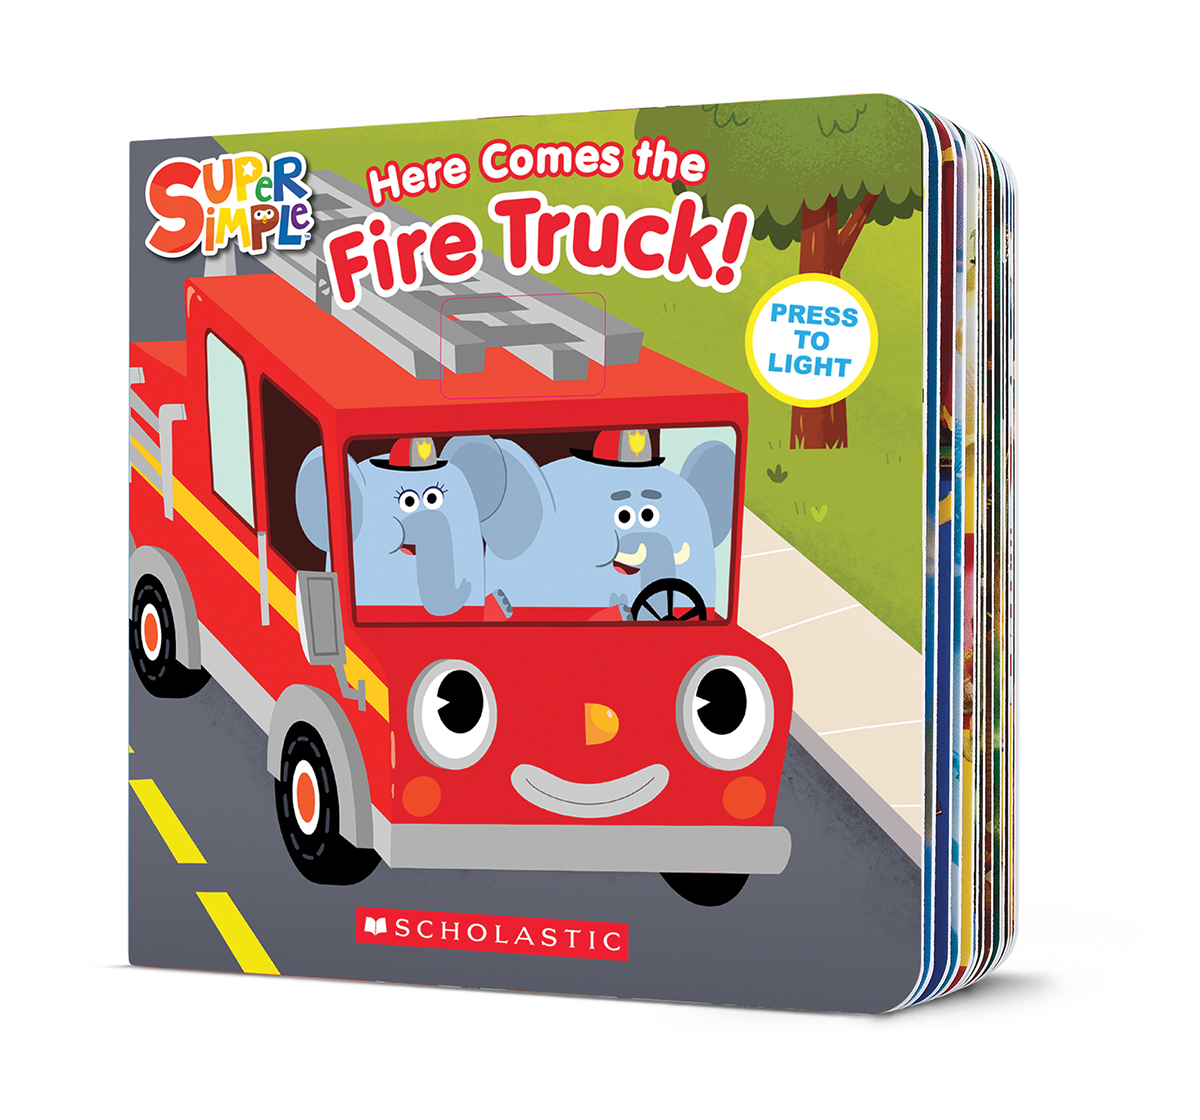  Super Simple: Here Comes the Fire Truck! 